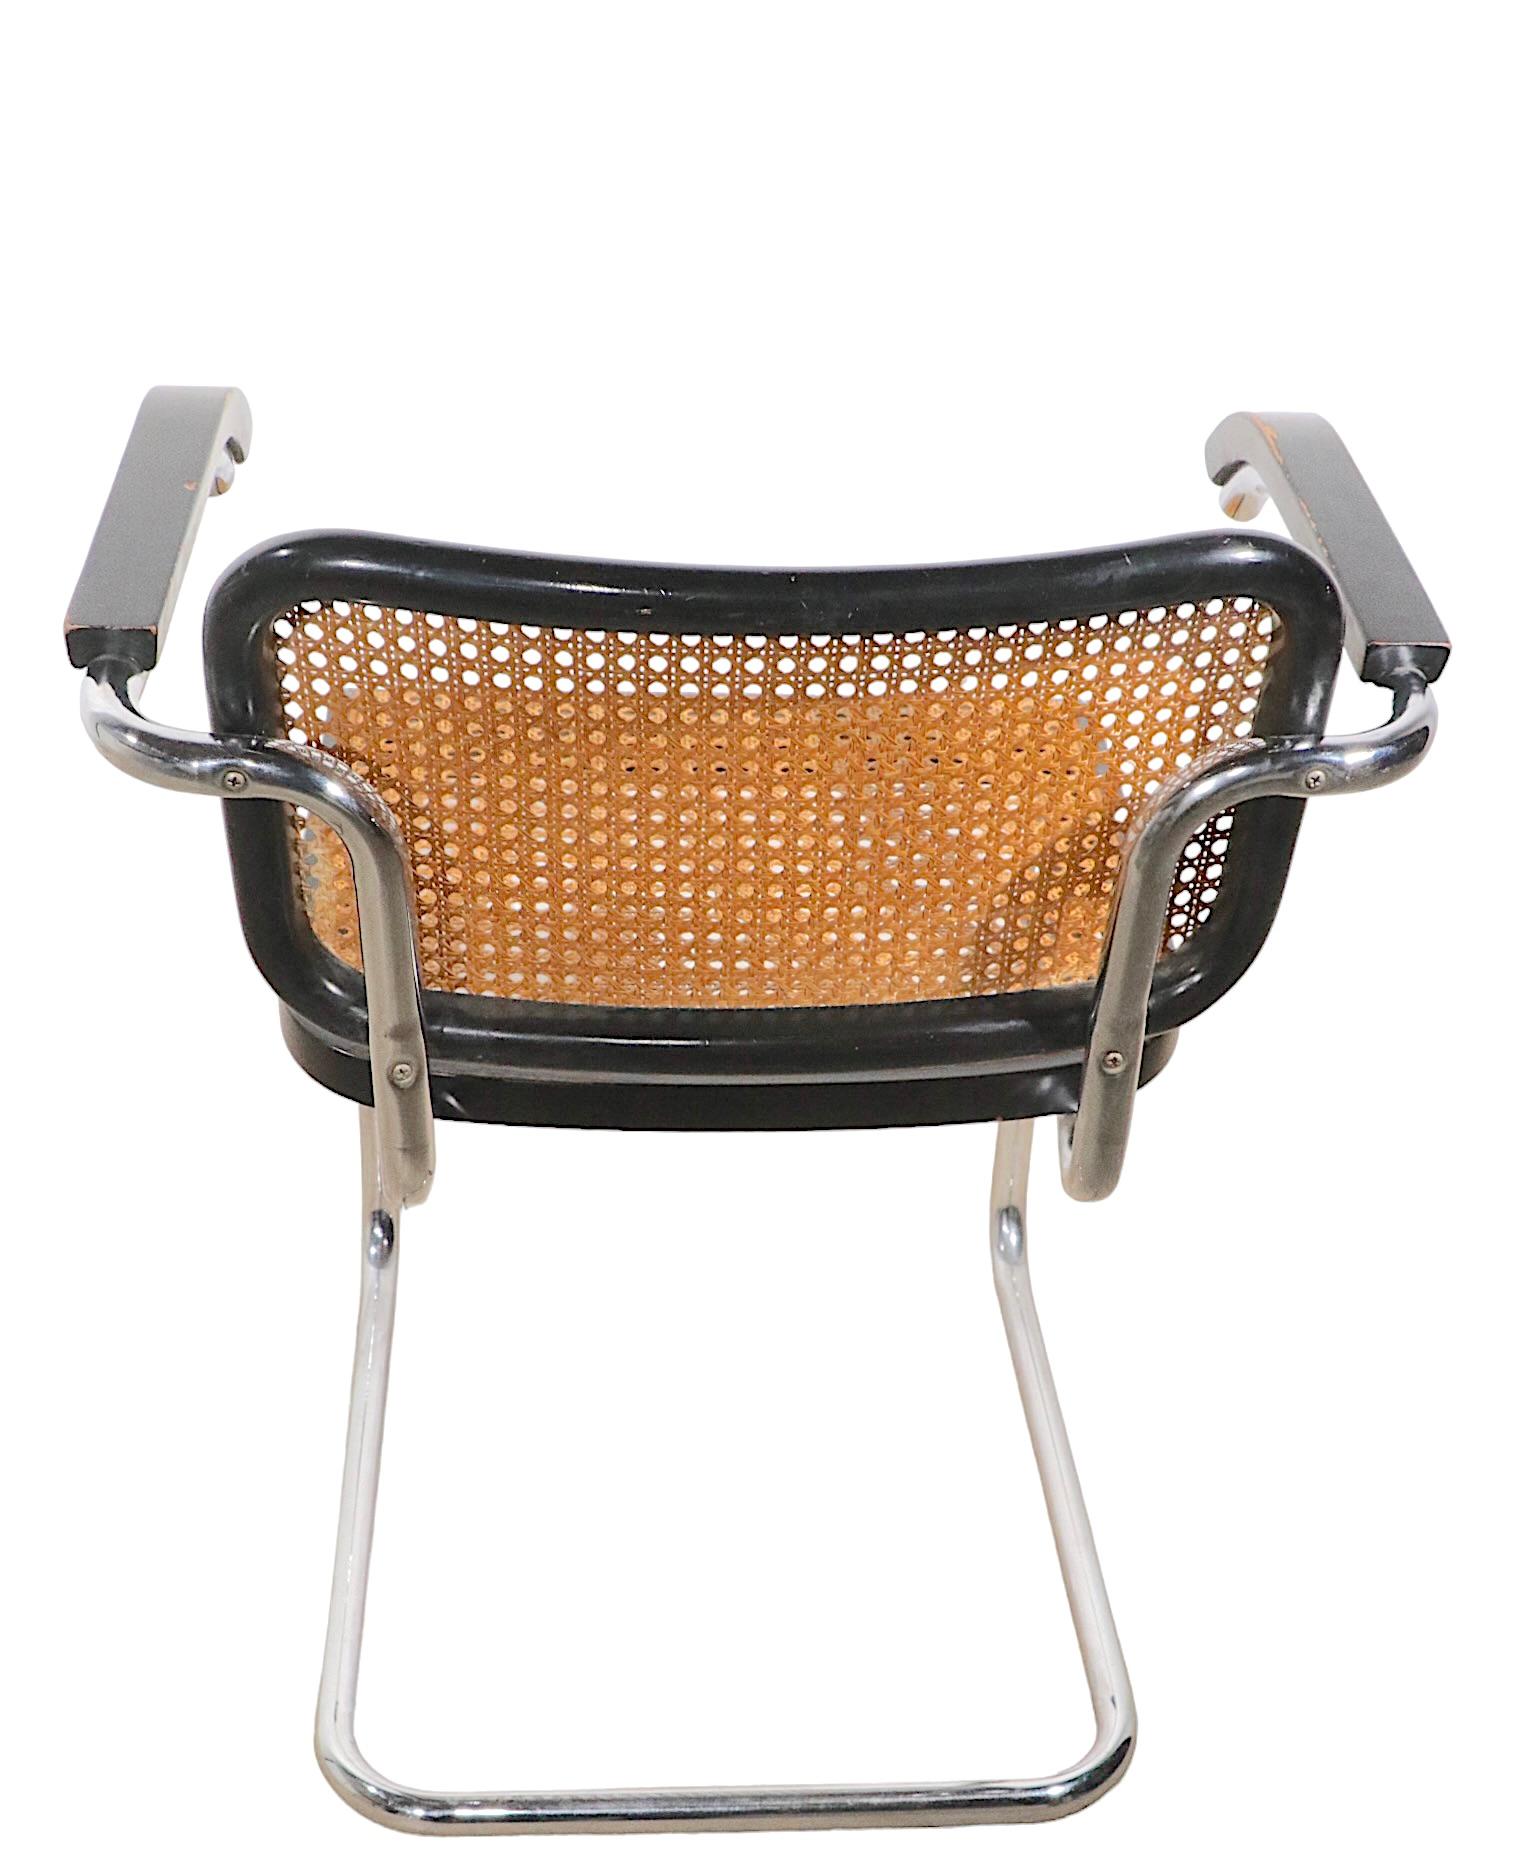 Cane Chrome and Black Cesca Chair Designed by Marcel Breuer Made in Italy circa 1970s